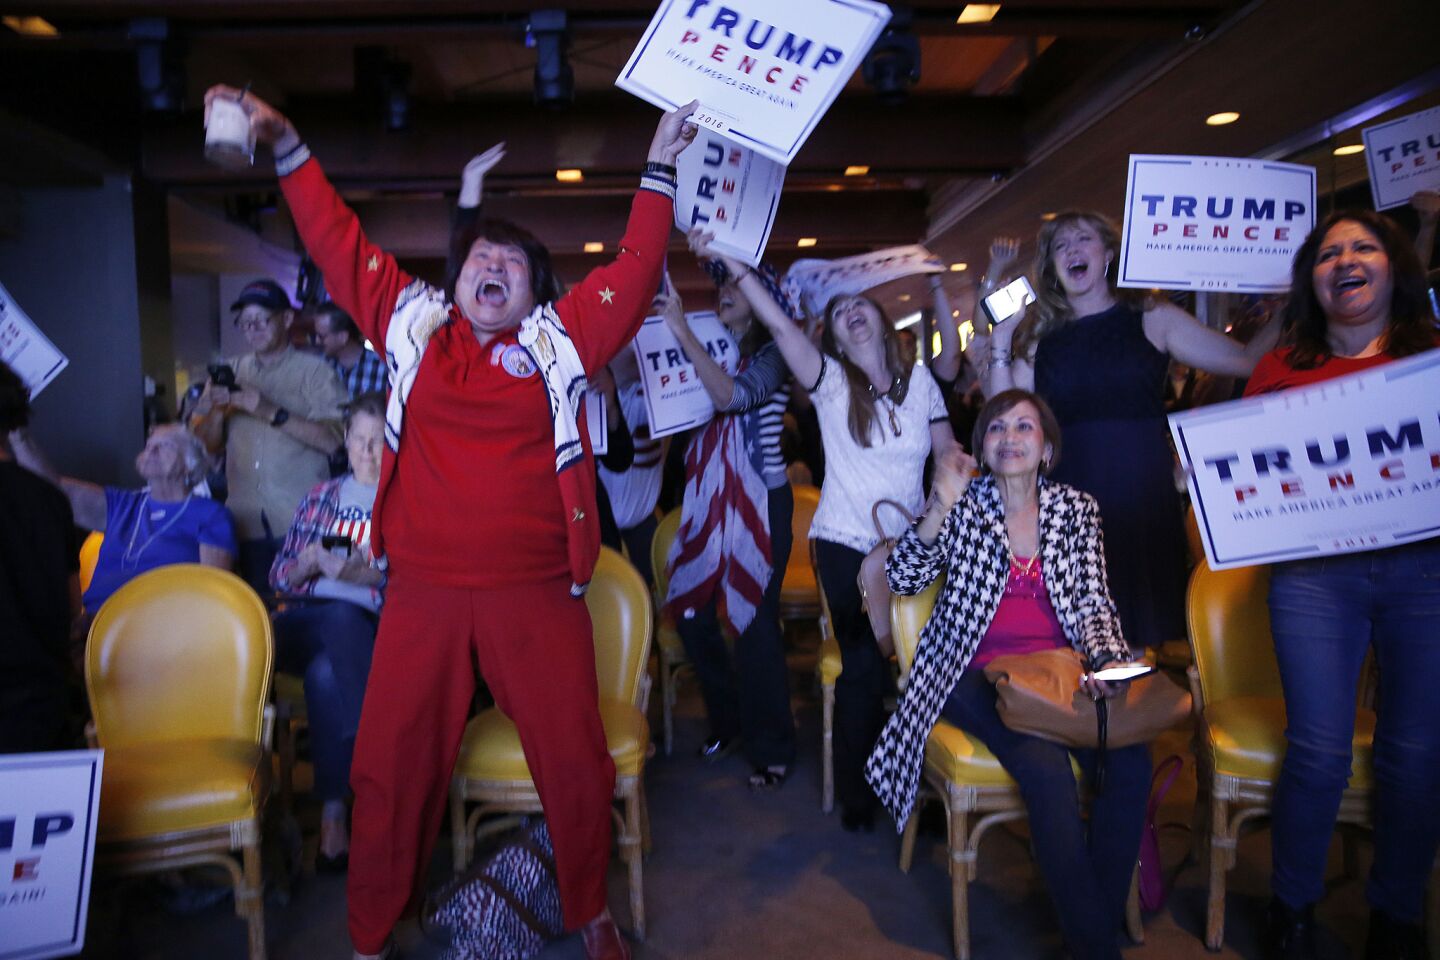 Nellie Gillogly, left, of Santa Ana, joins republicans erupting in celebration at the OCGOP election party at China Palace in Newport Beach.